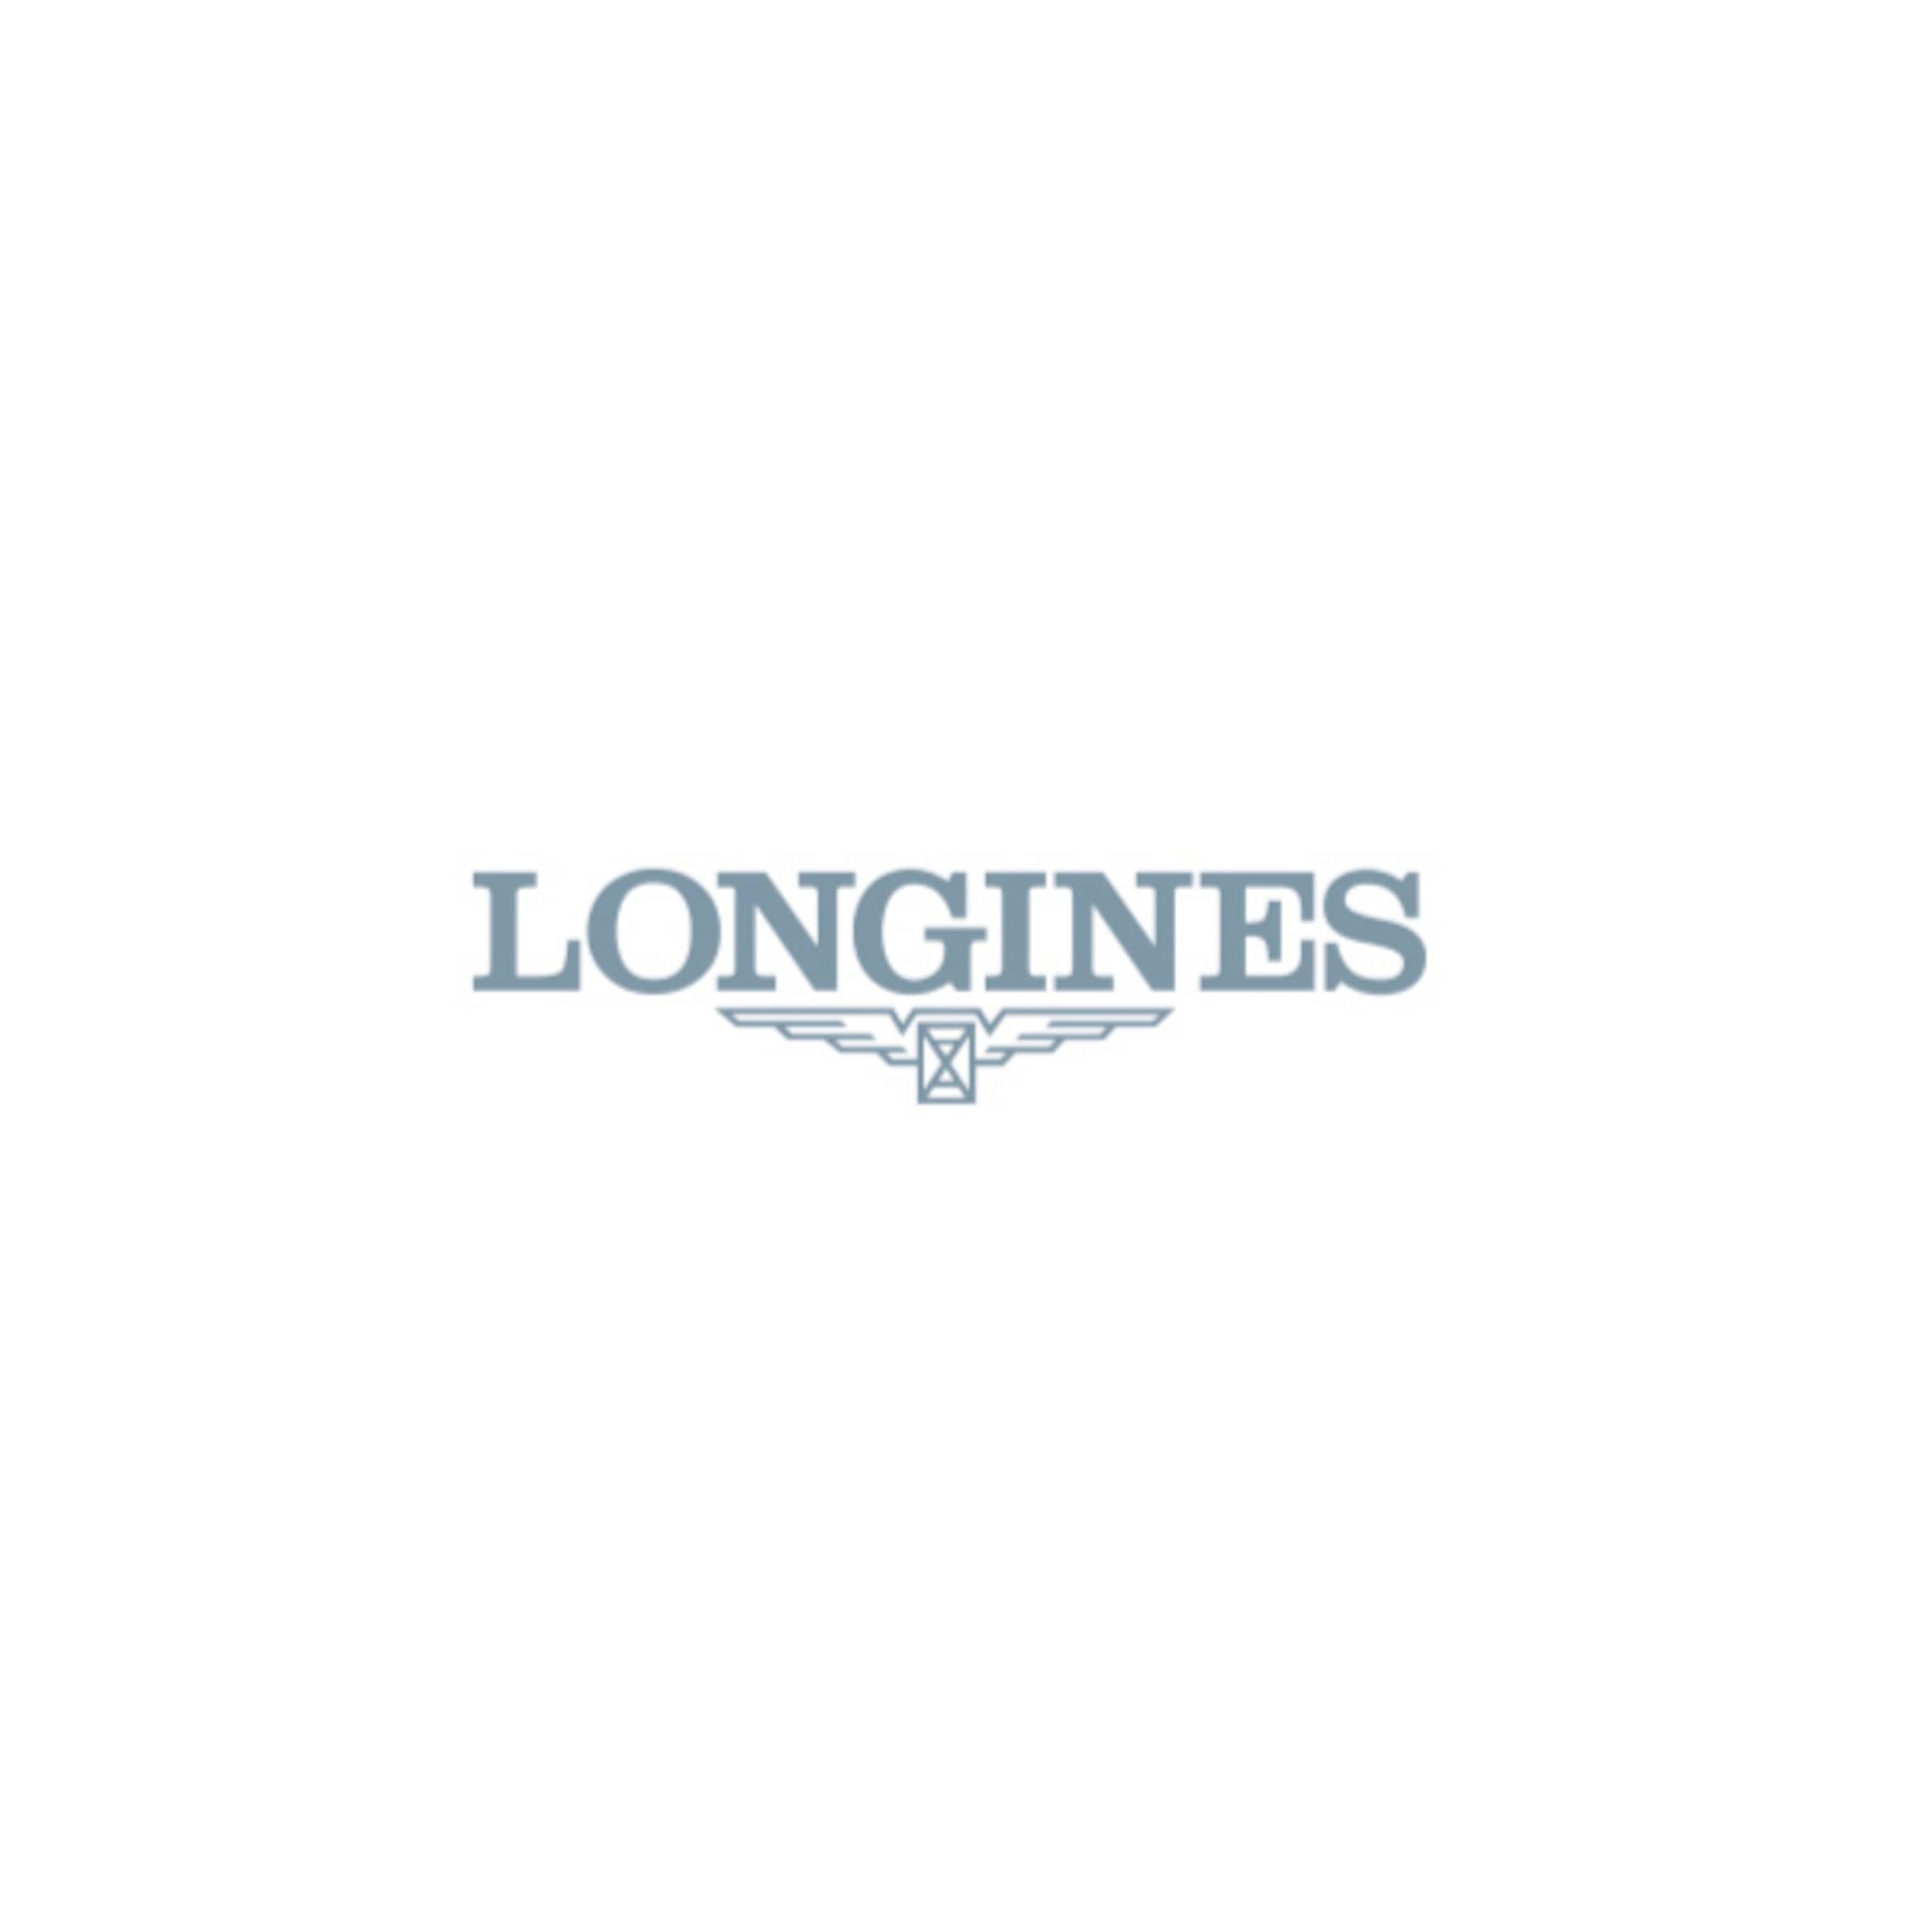 THE LONGINES MASTER COLLECTION stainless steel Watch L2.793.4.57.6